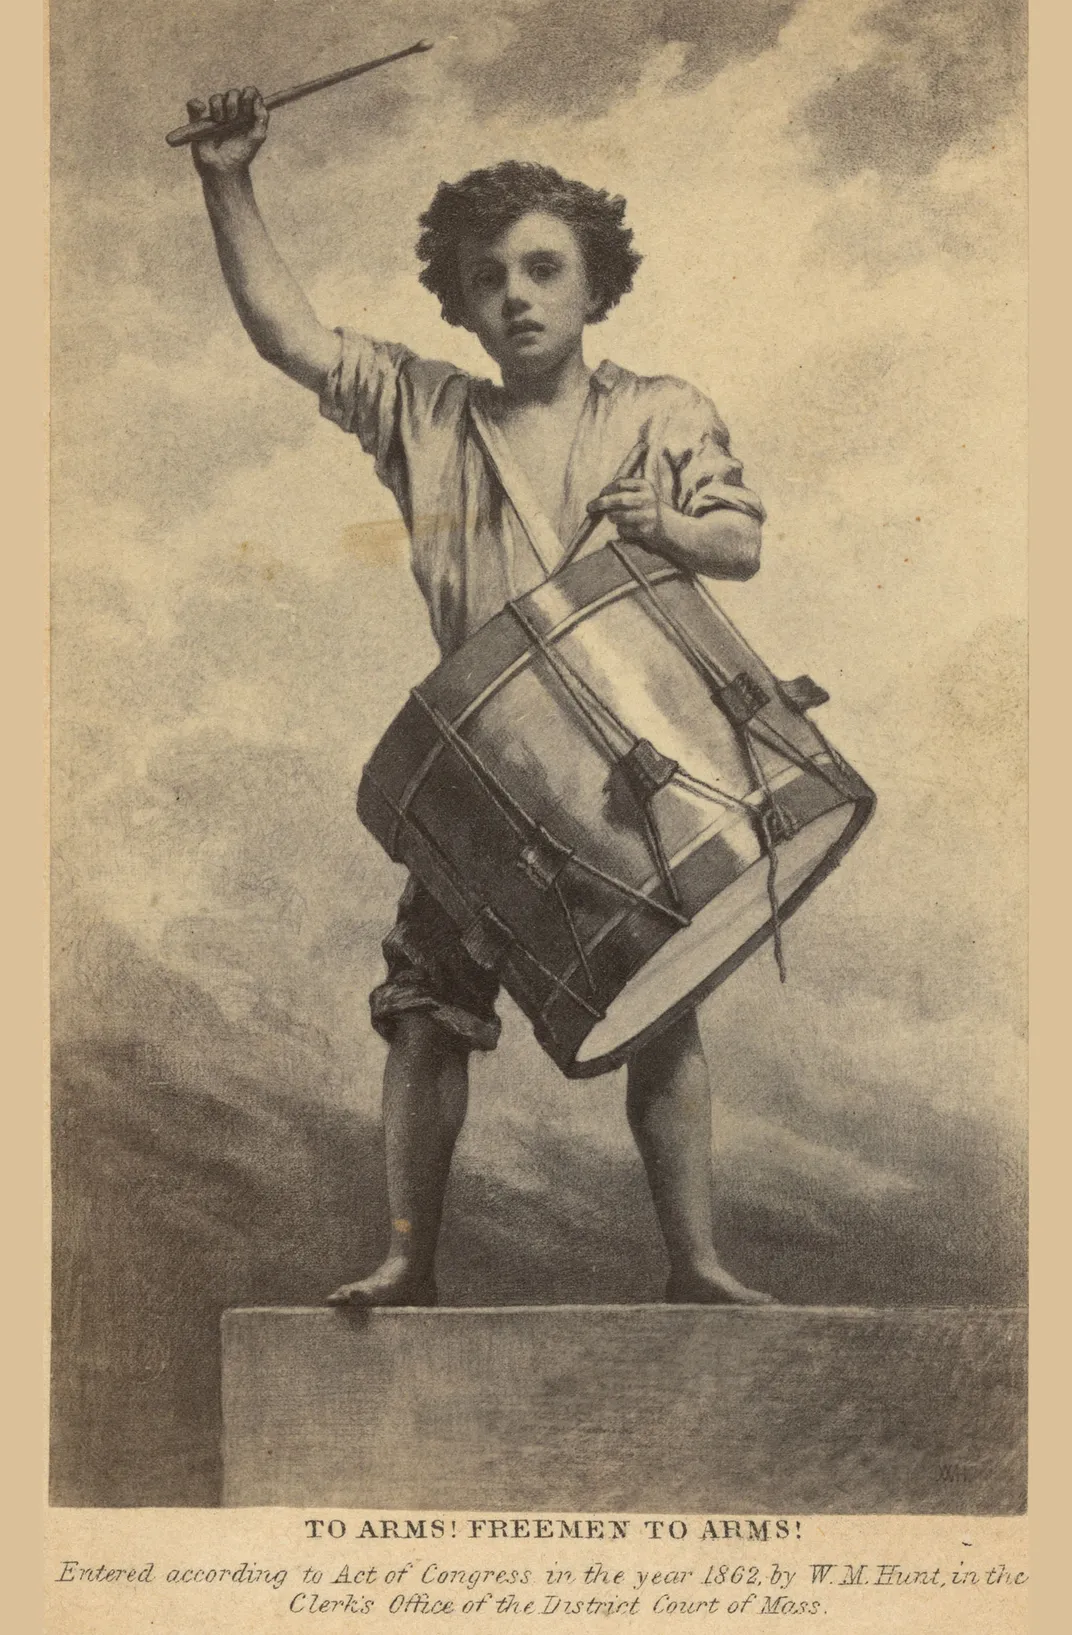 Print of William Morris Hunt’s painting The Drummer Boy